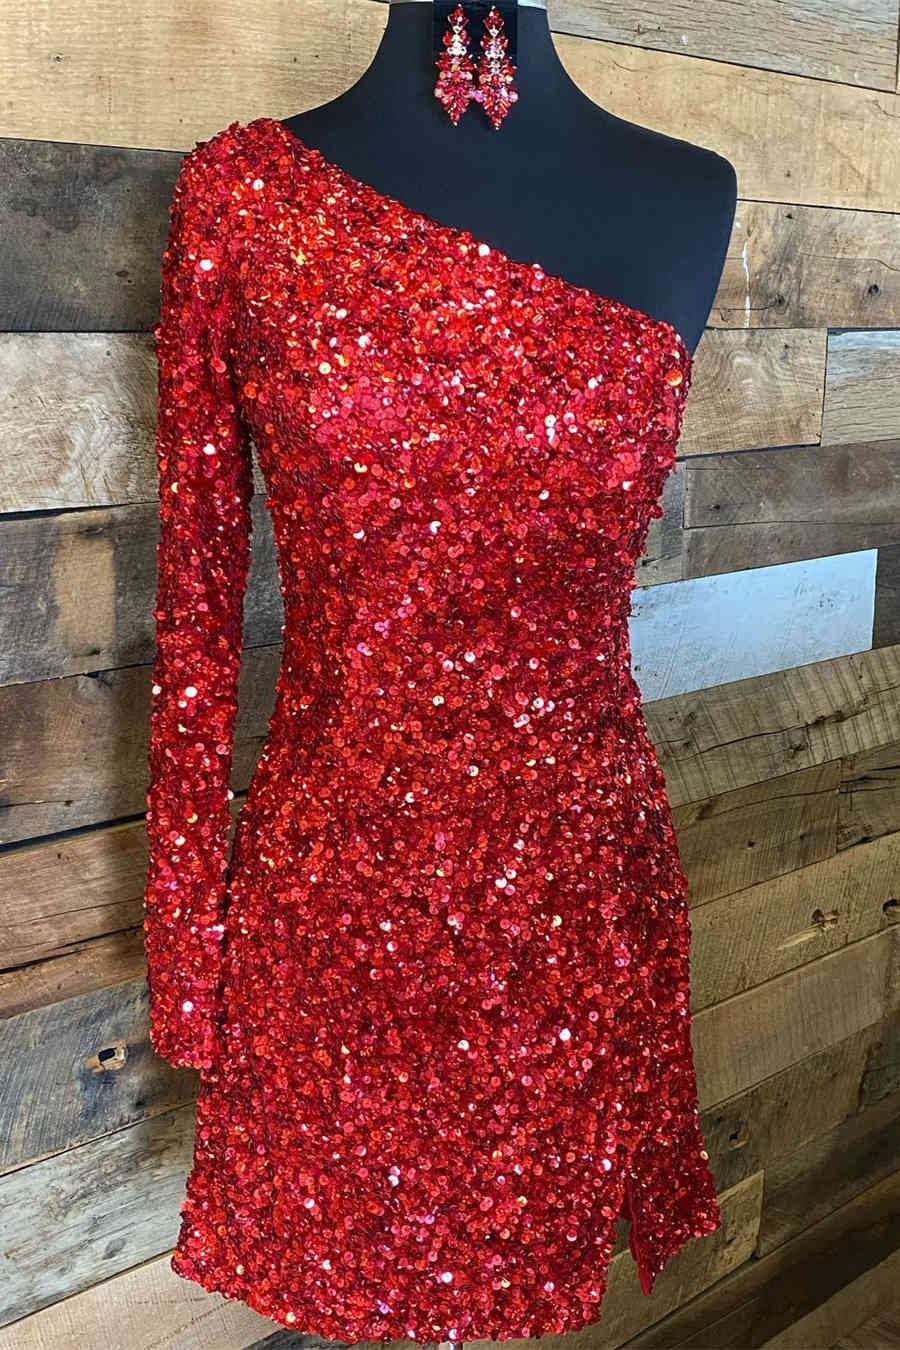 Glitter One Sleeve Red Sequined Homecoming Dress,Stunning Cocktail Dresses Short Formal